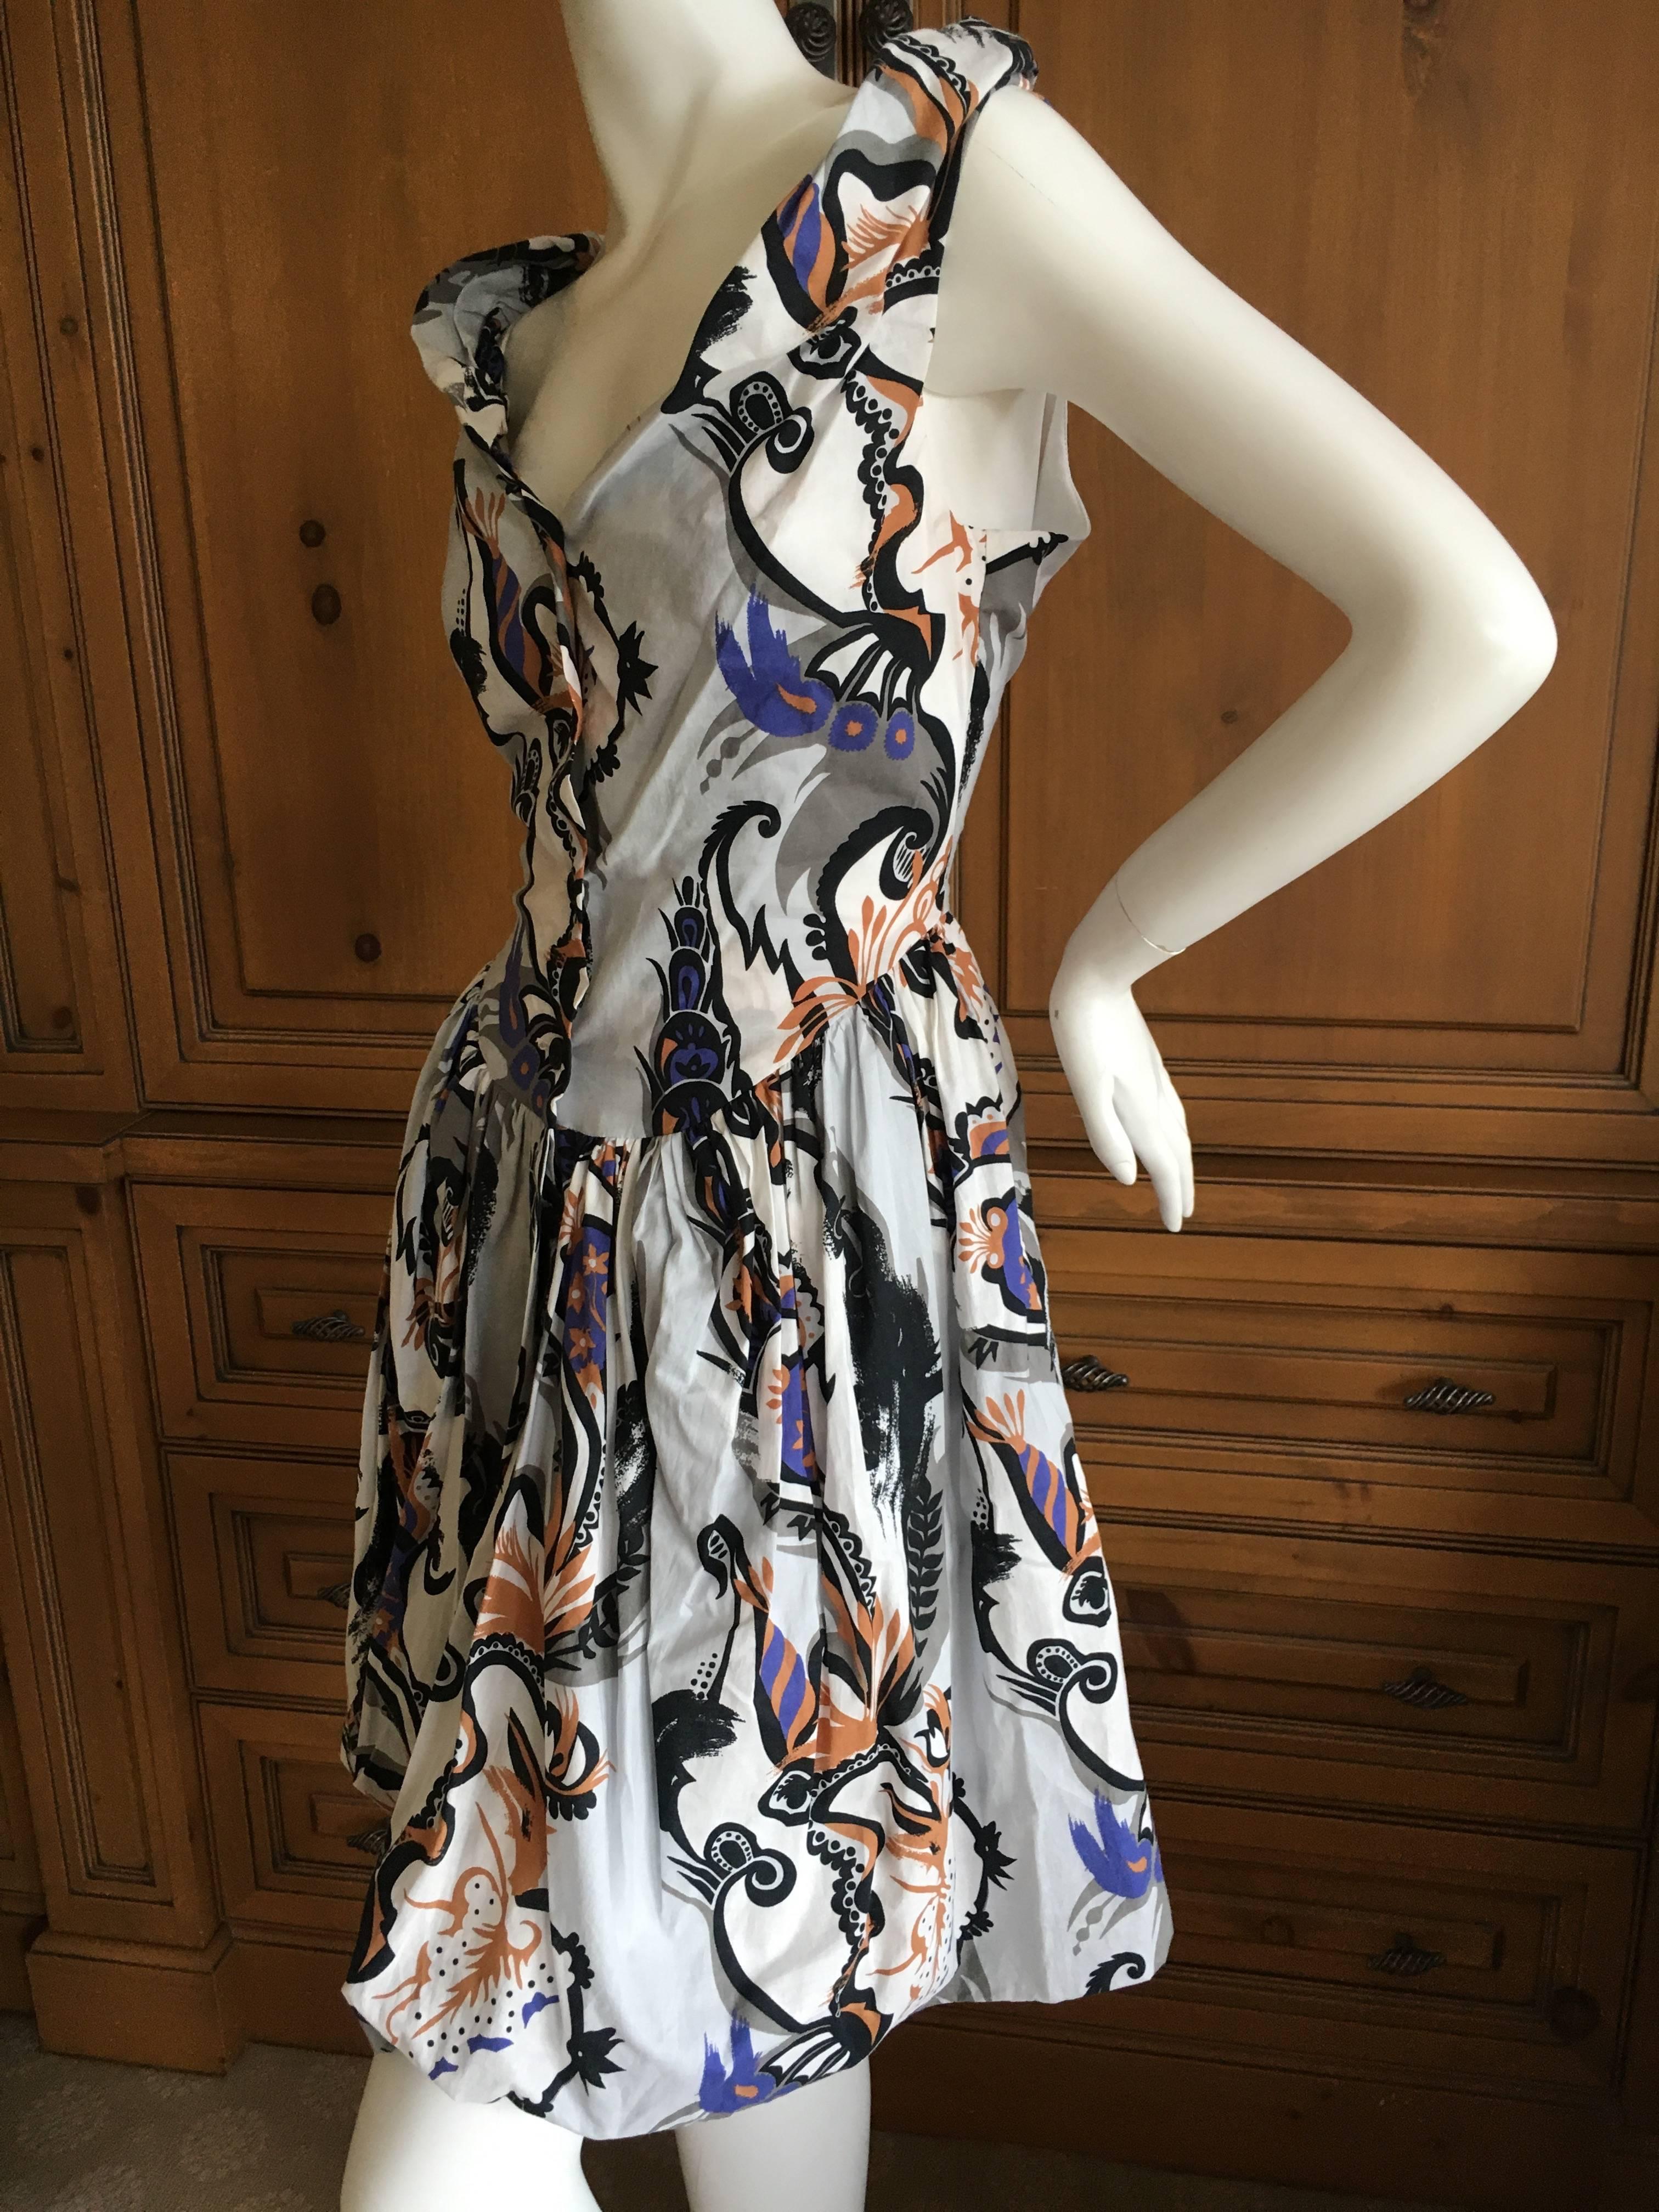 Vivienne Westwood Paisley Cotton Day Dress for Anglomania Size 42 In Excellent Condition For Sale In Cloverdale, CA